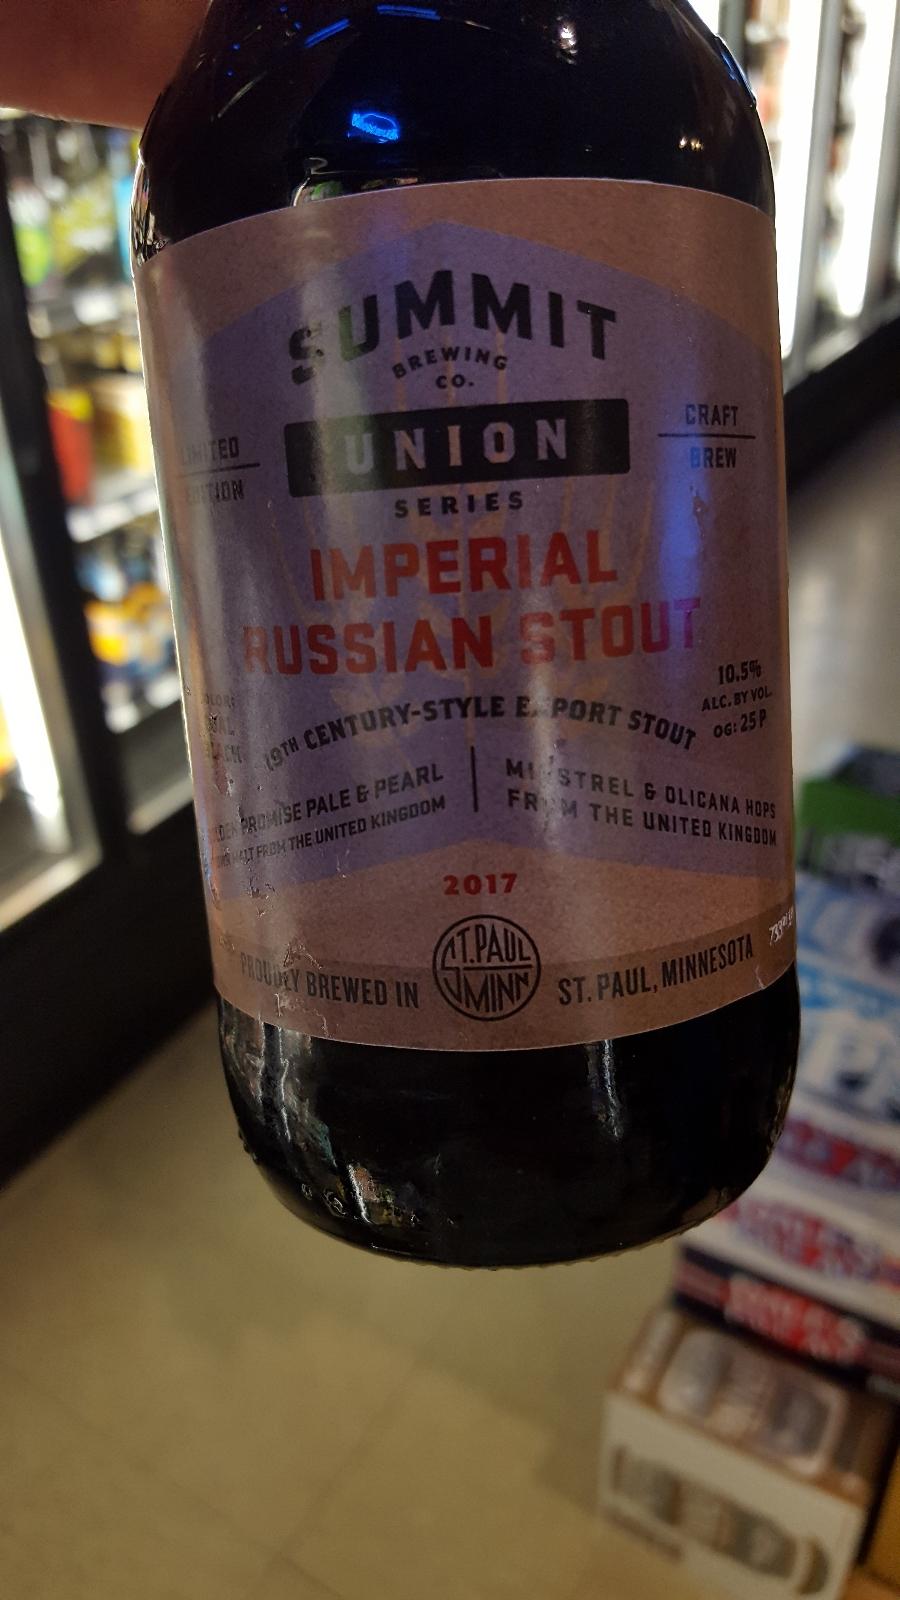 Union Series #6: Imperial Russian Stout